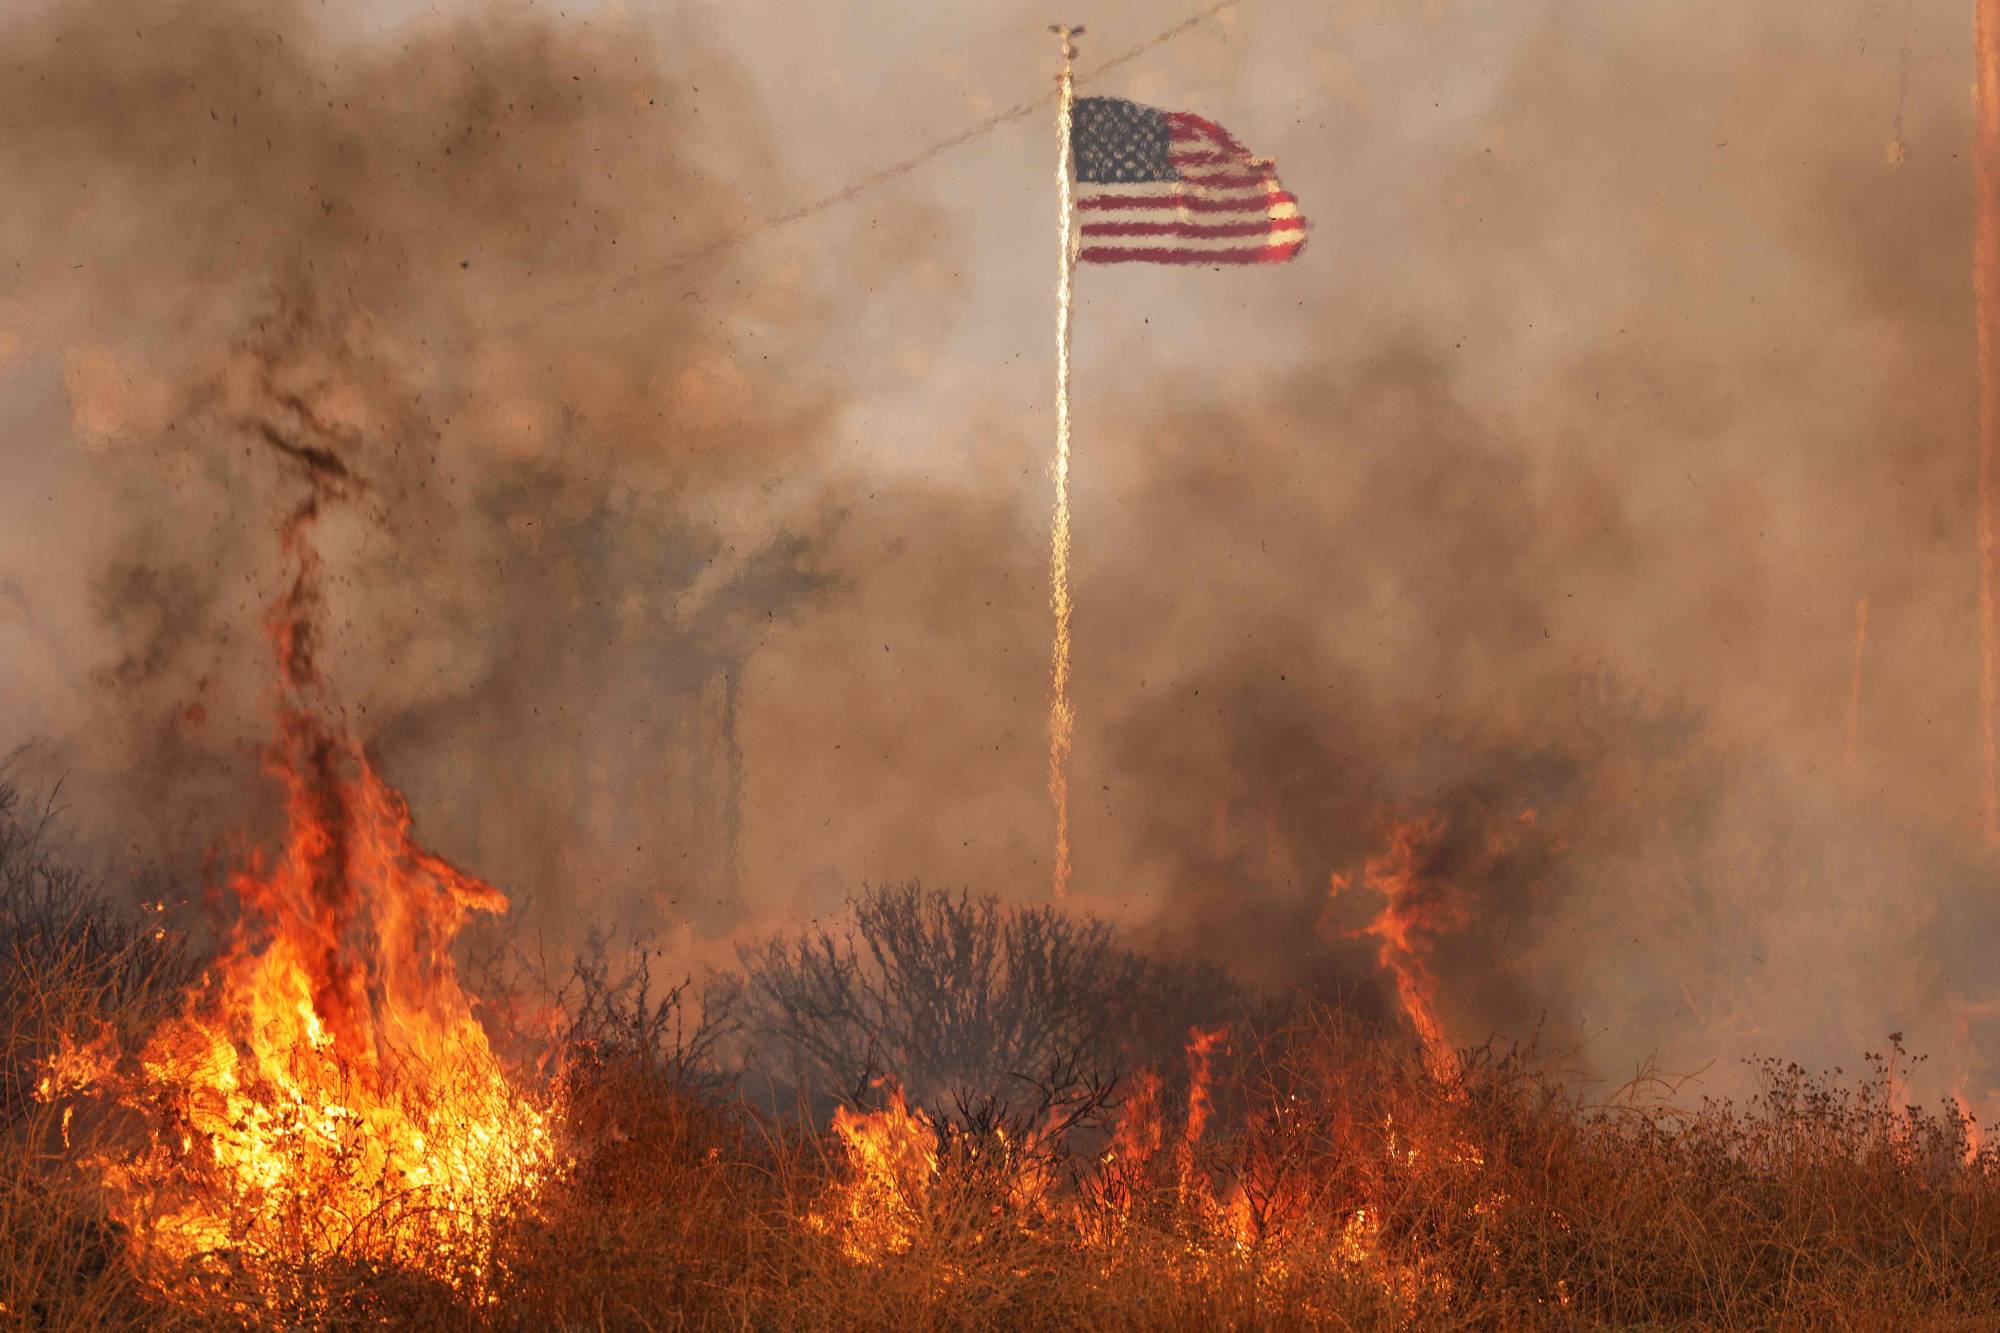 The United States national flag surrounded by flames during a fire in Moreno Valley in Riverside County, California, on Friday. | AFP-JIJI